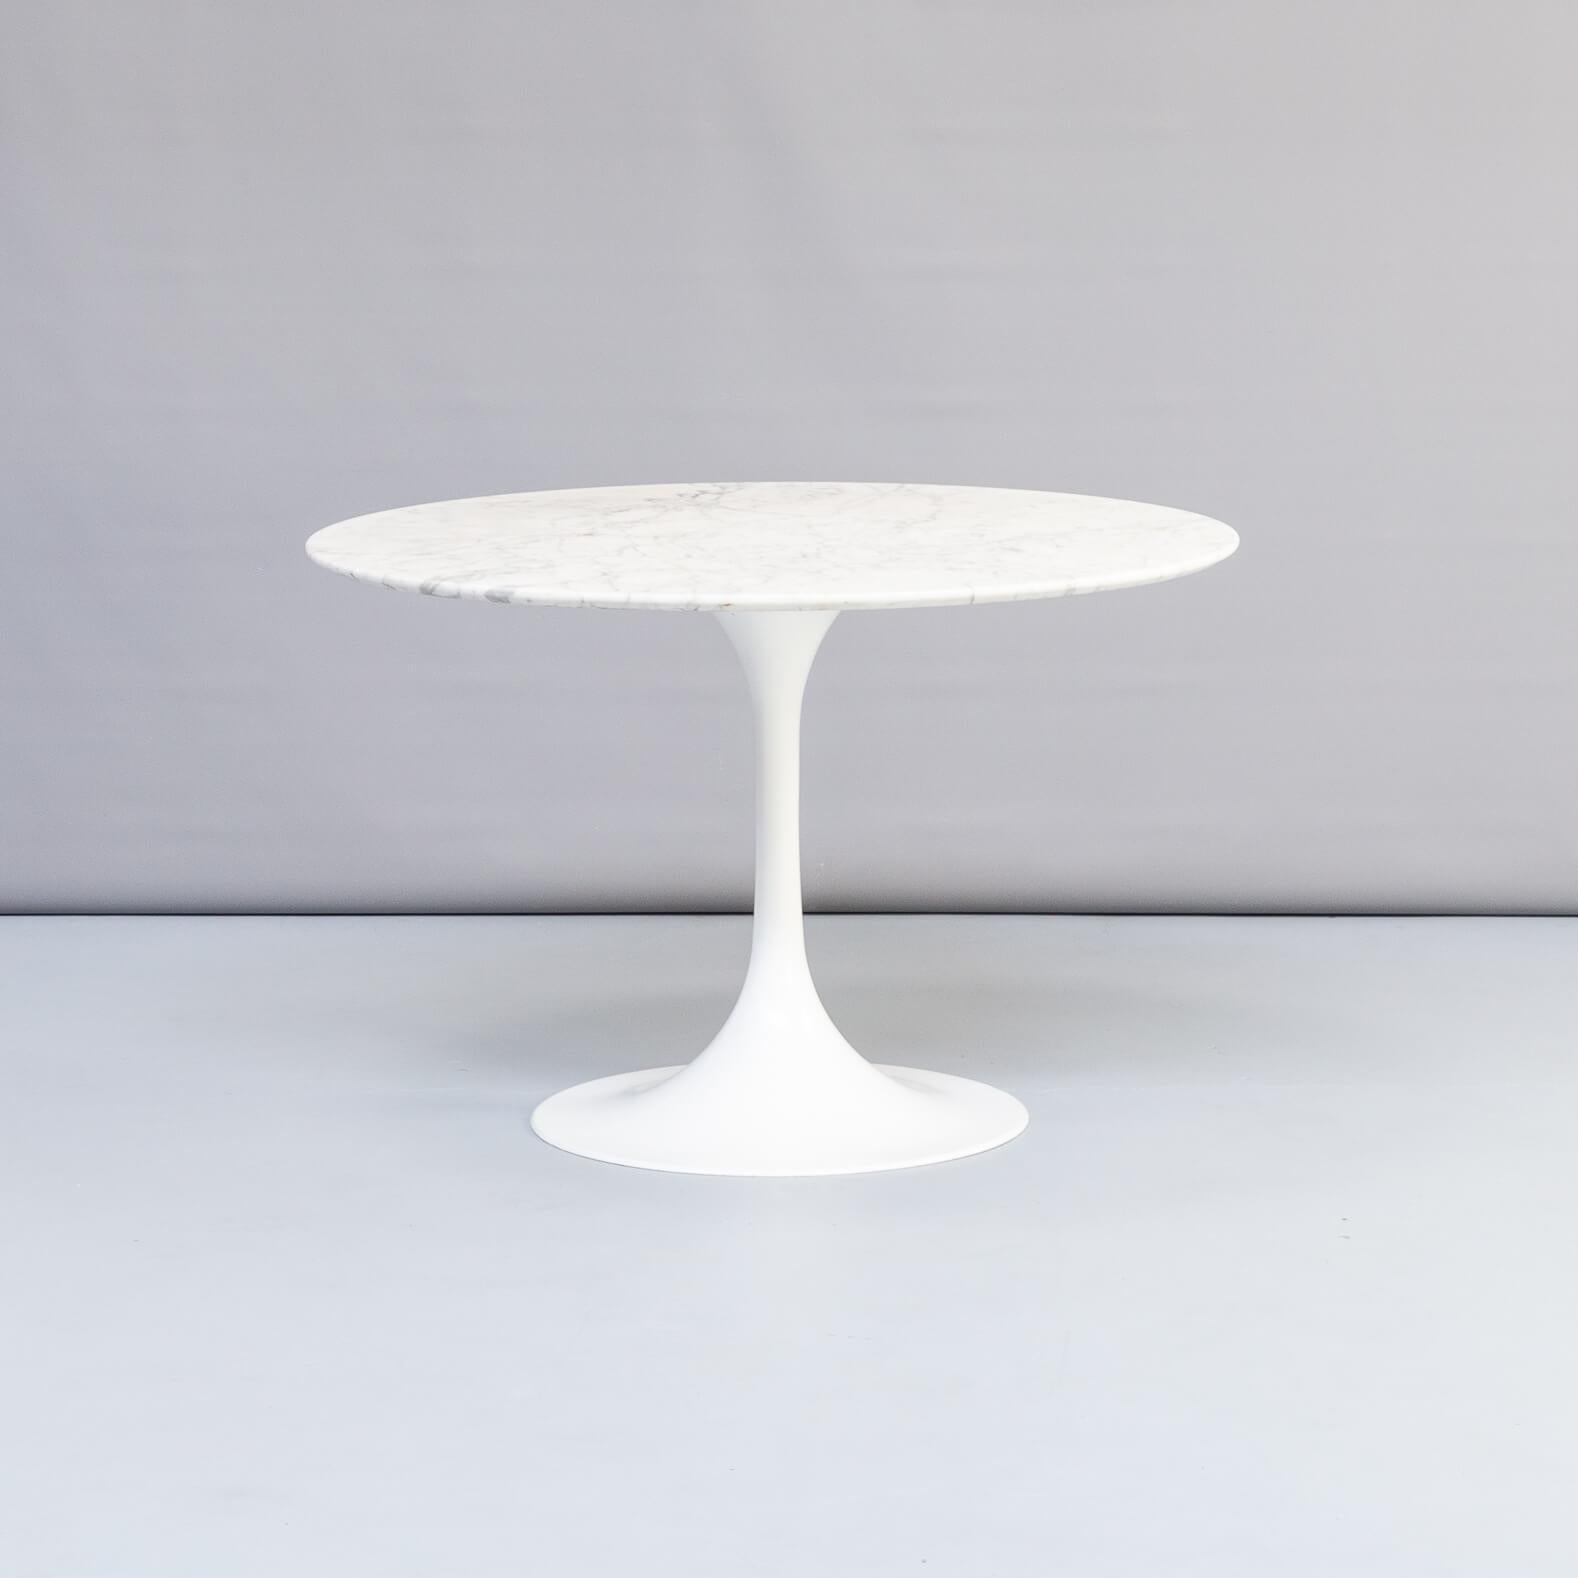 In the late 1950s / early 1960s Knoll international came with the famous Tulip table on the market. Beautiful trumpet foot and a marble table top in bianca carrara. Around the same time Rudi Bonzanini developed his bianca carrara round dining tables